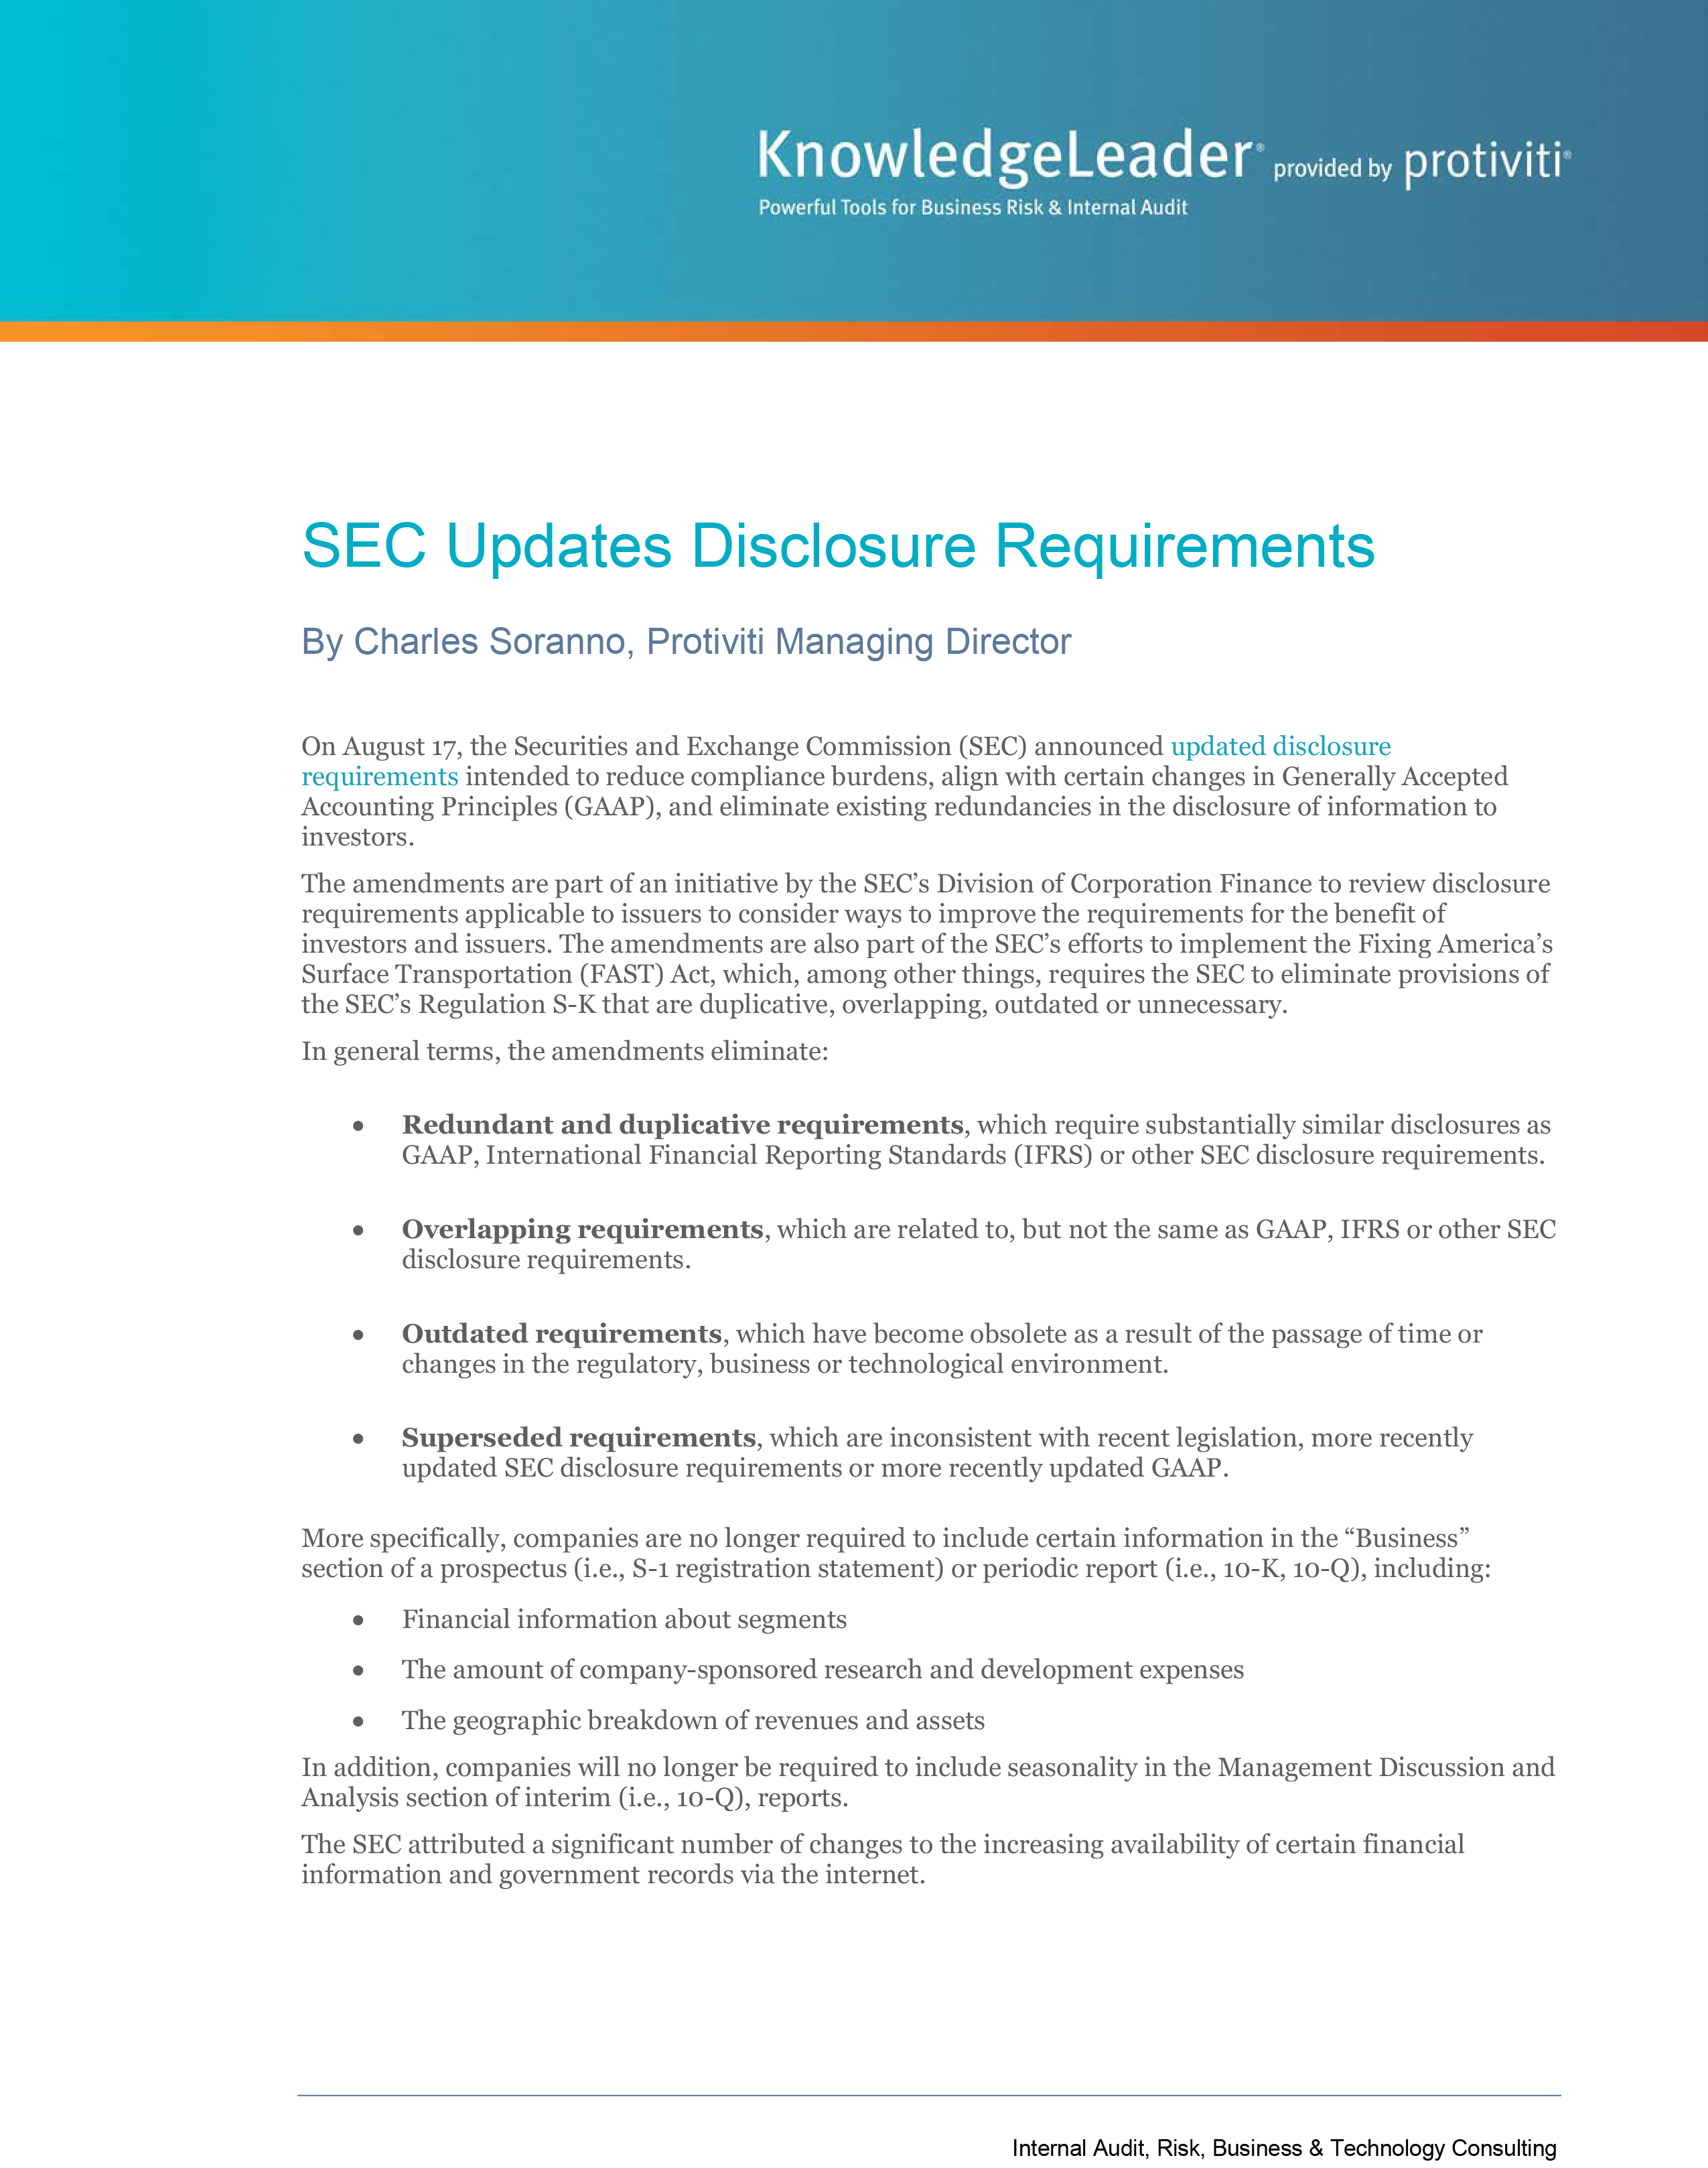 Screenshot of the first page of SEC Updates Disclosure Requirements